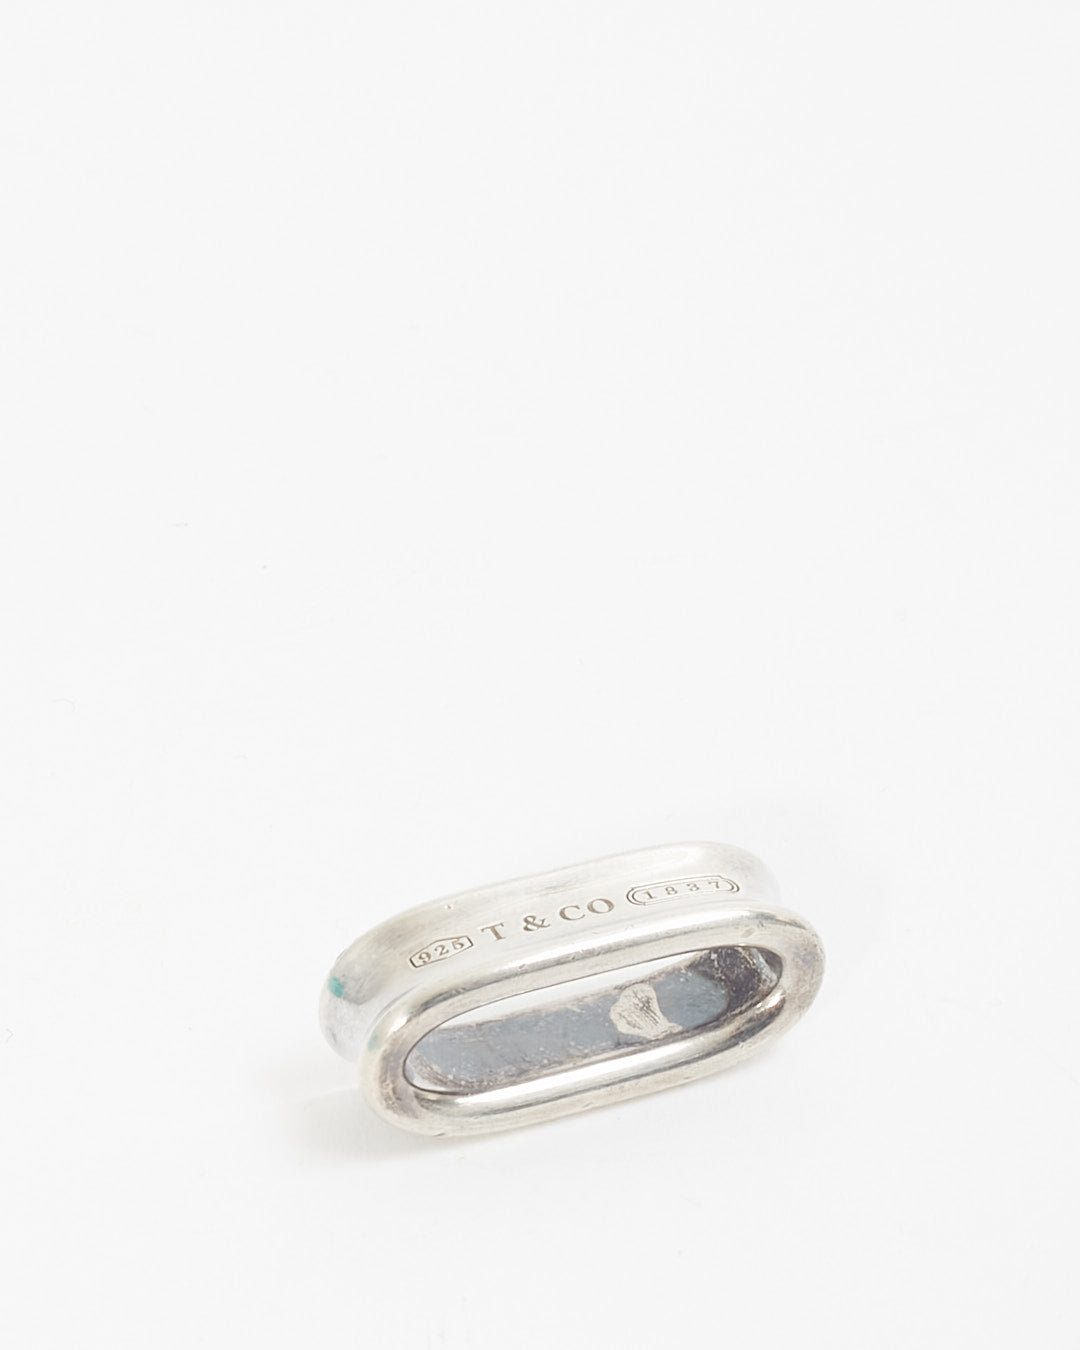 Tiffany & Co. Sterling Silver 1837 Scarf Ring